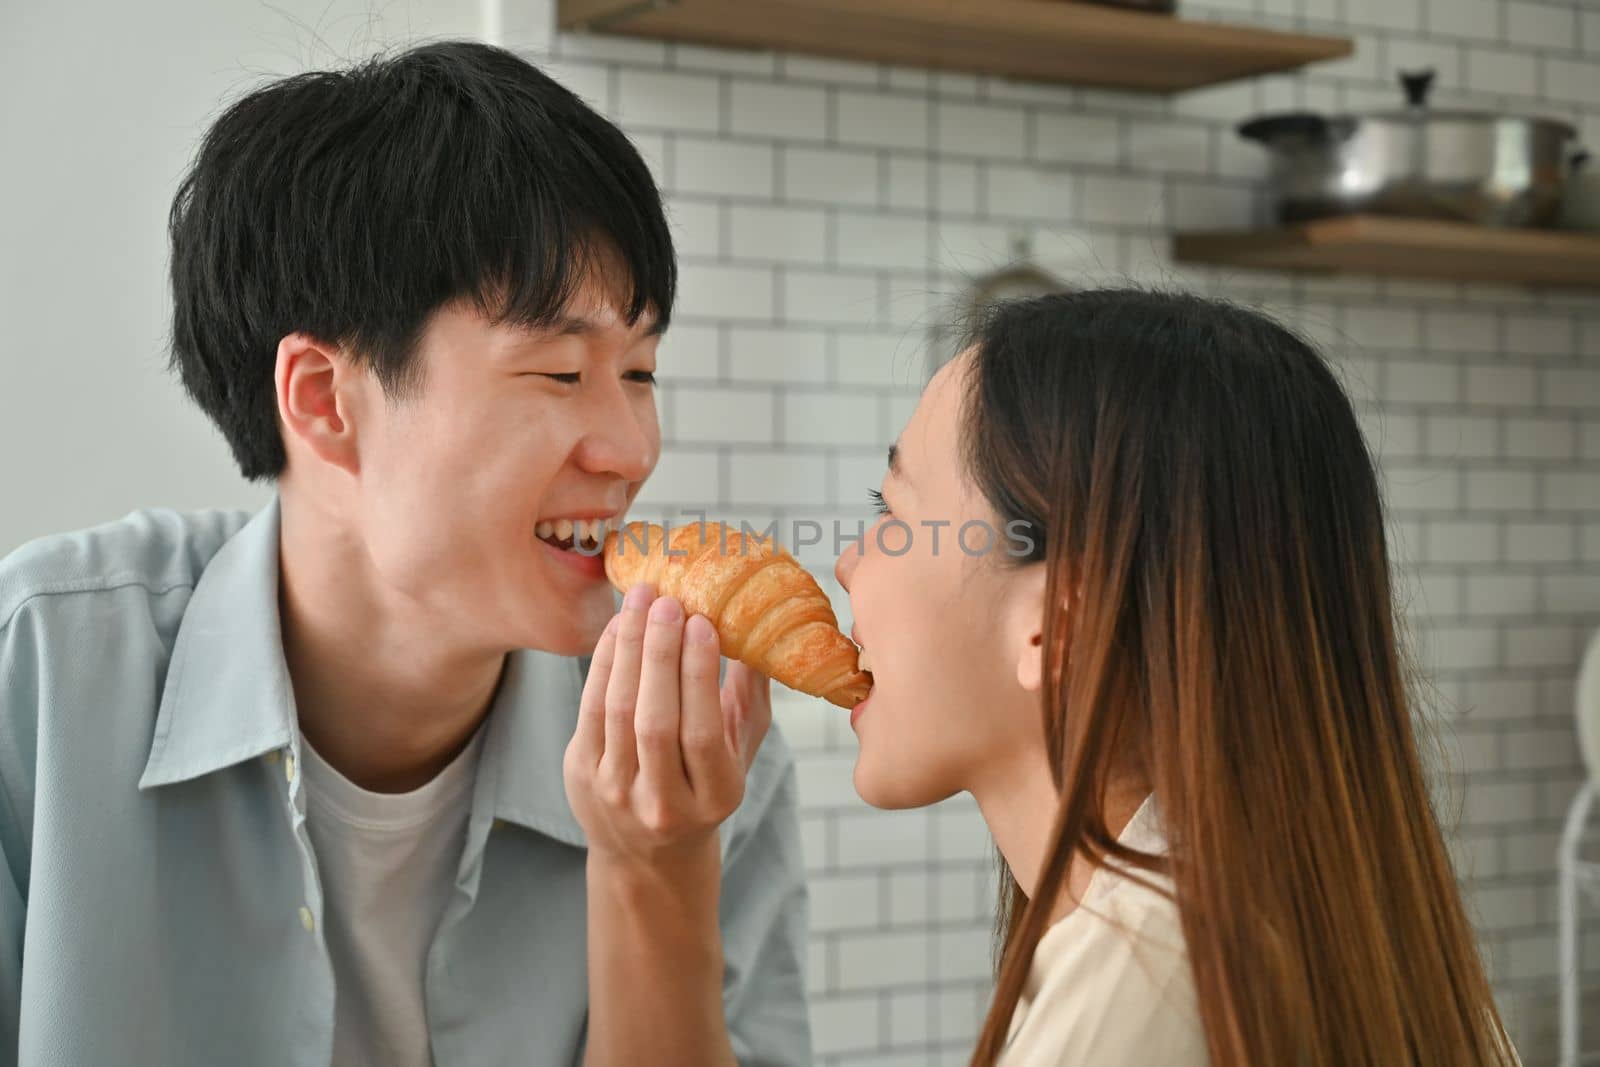 Cute young couple eating croissant while having breakfast in kitchen, enjoying leisure weekend time together by prathanchorruangsak